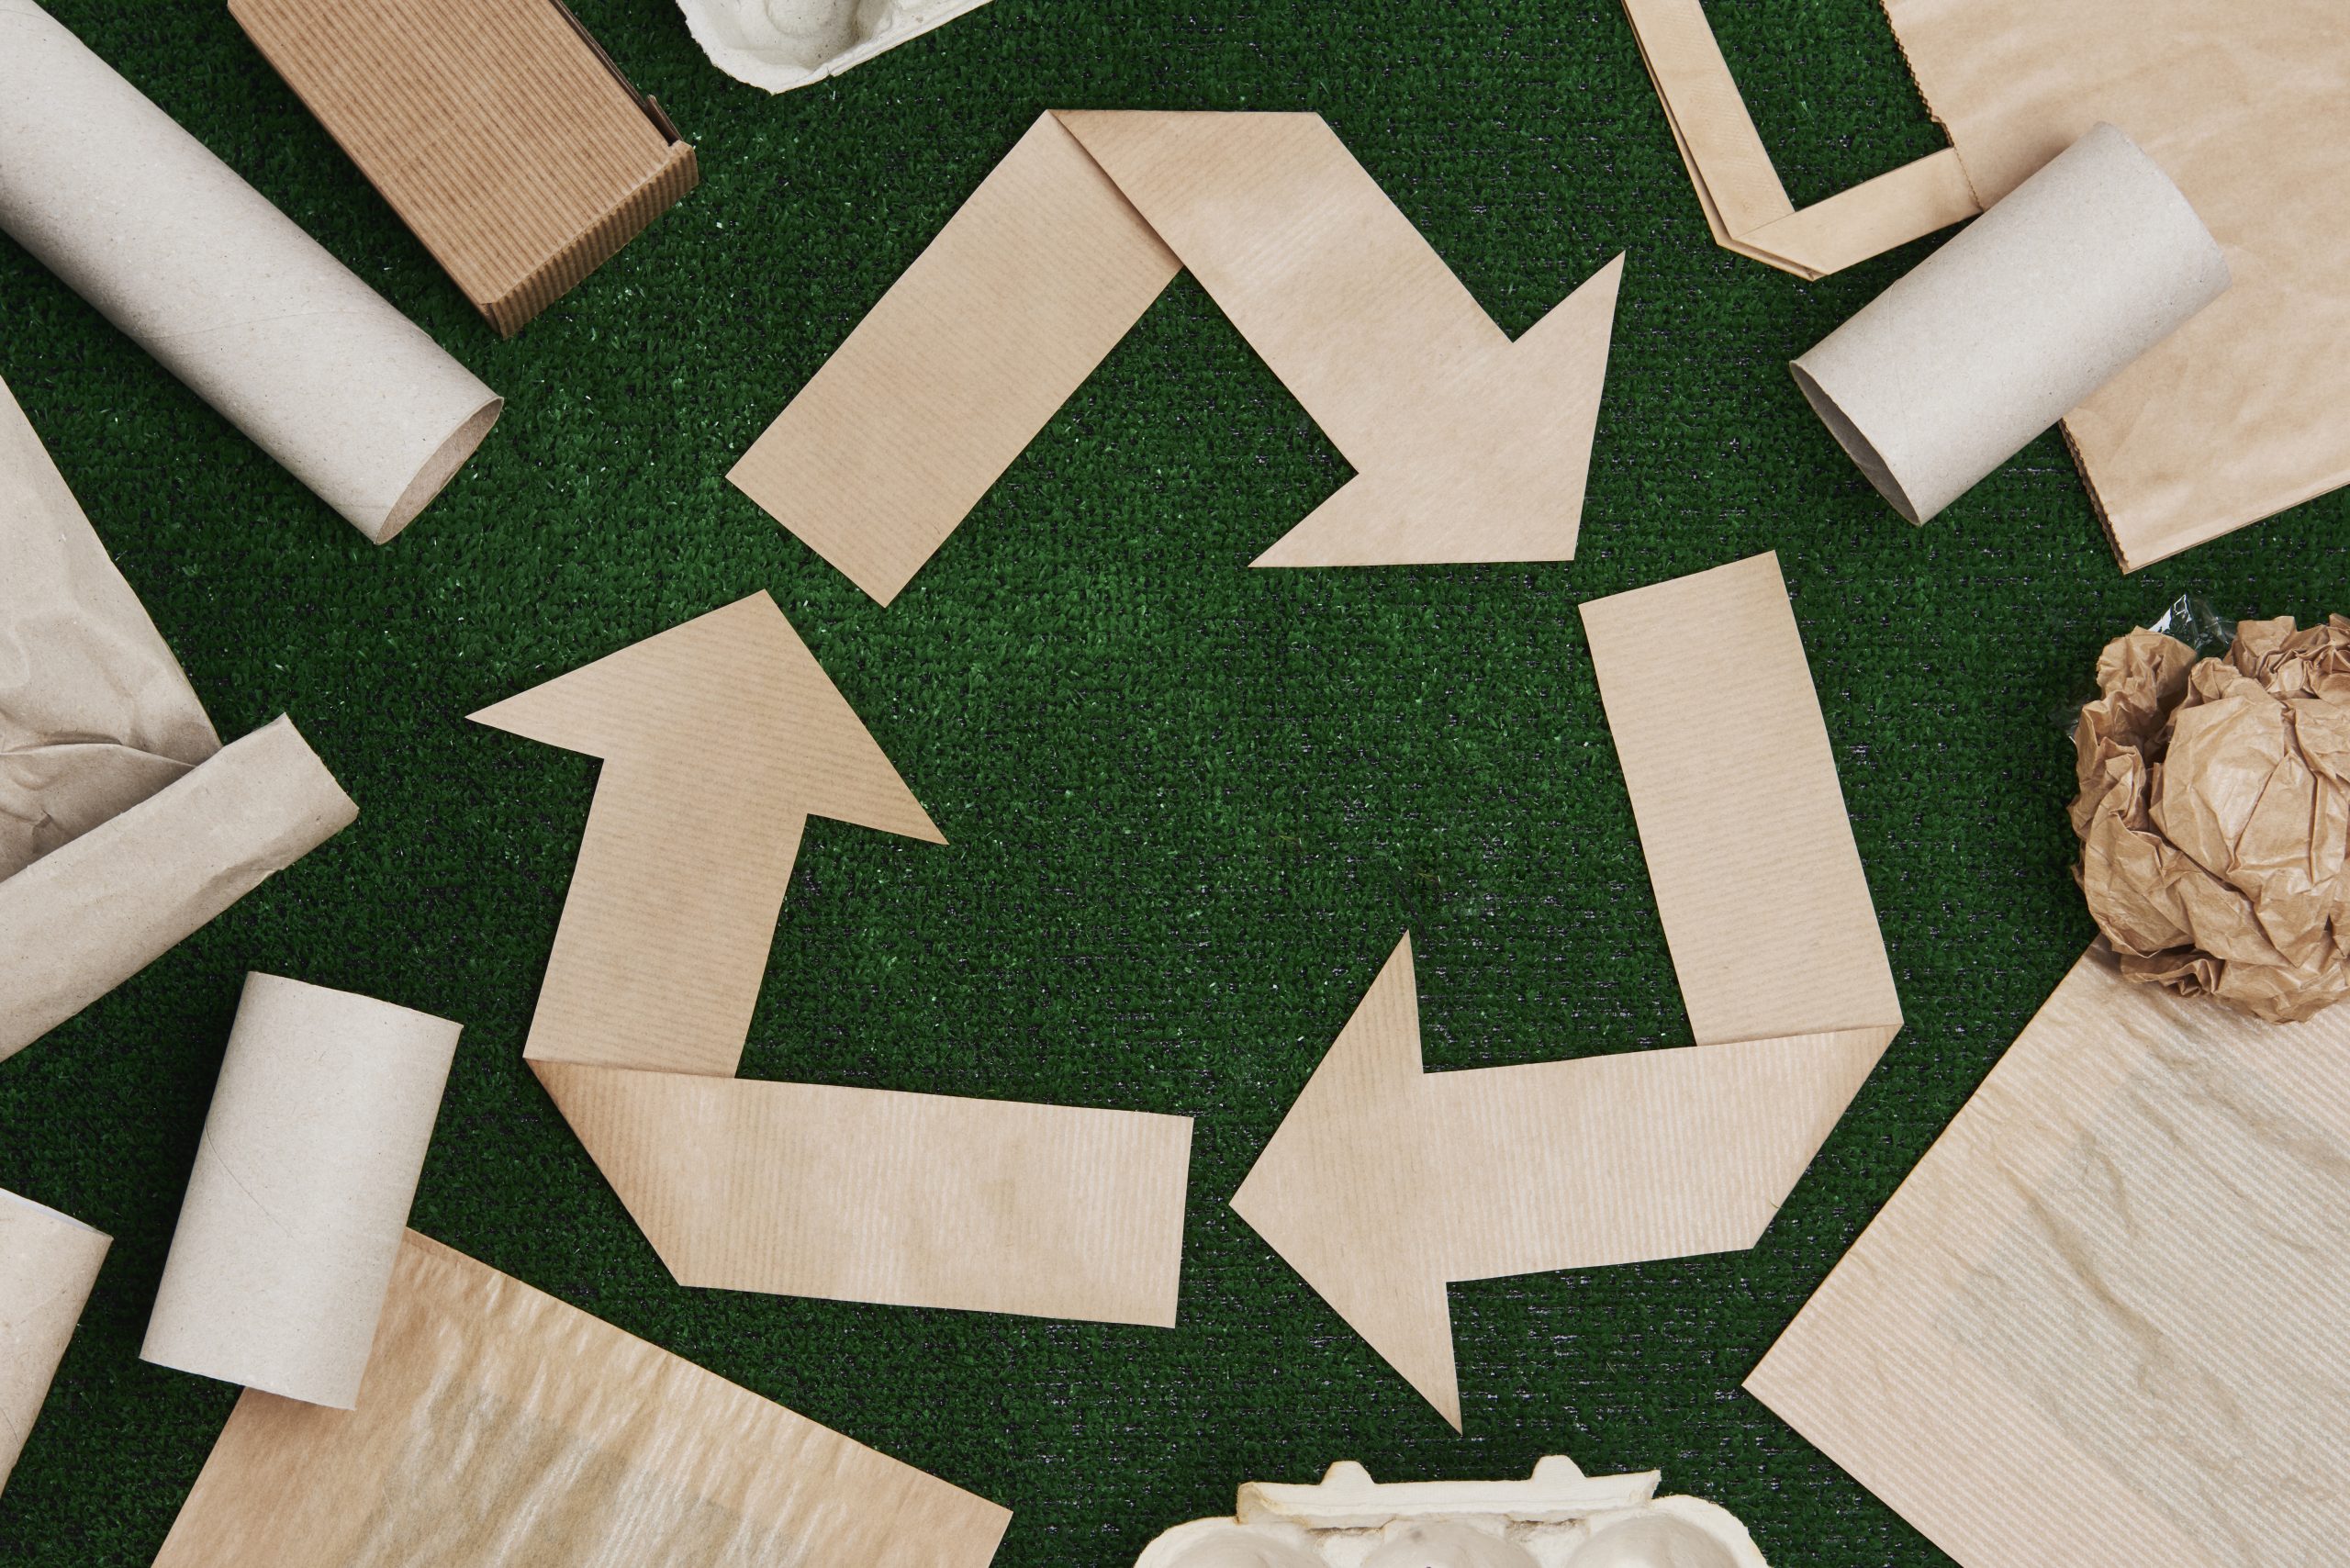 FSC ® CERTIFIED PAPER VS RECYCLED PAPER – What’s the difference?